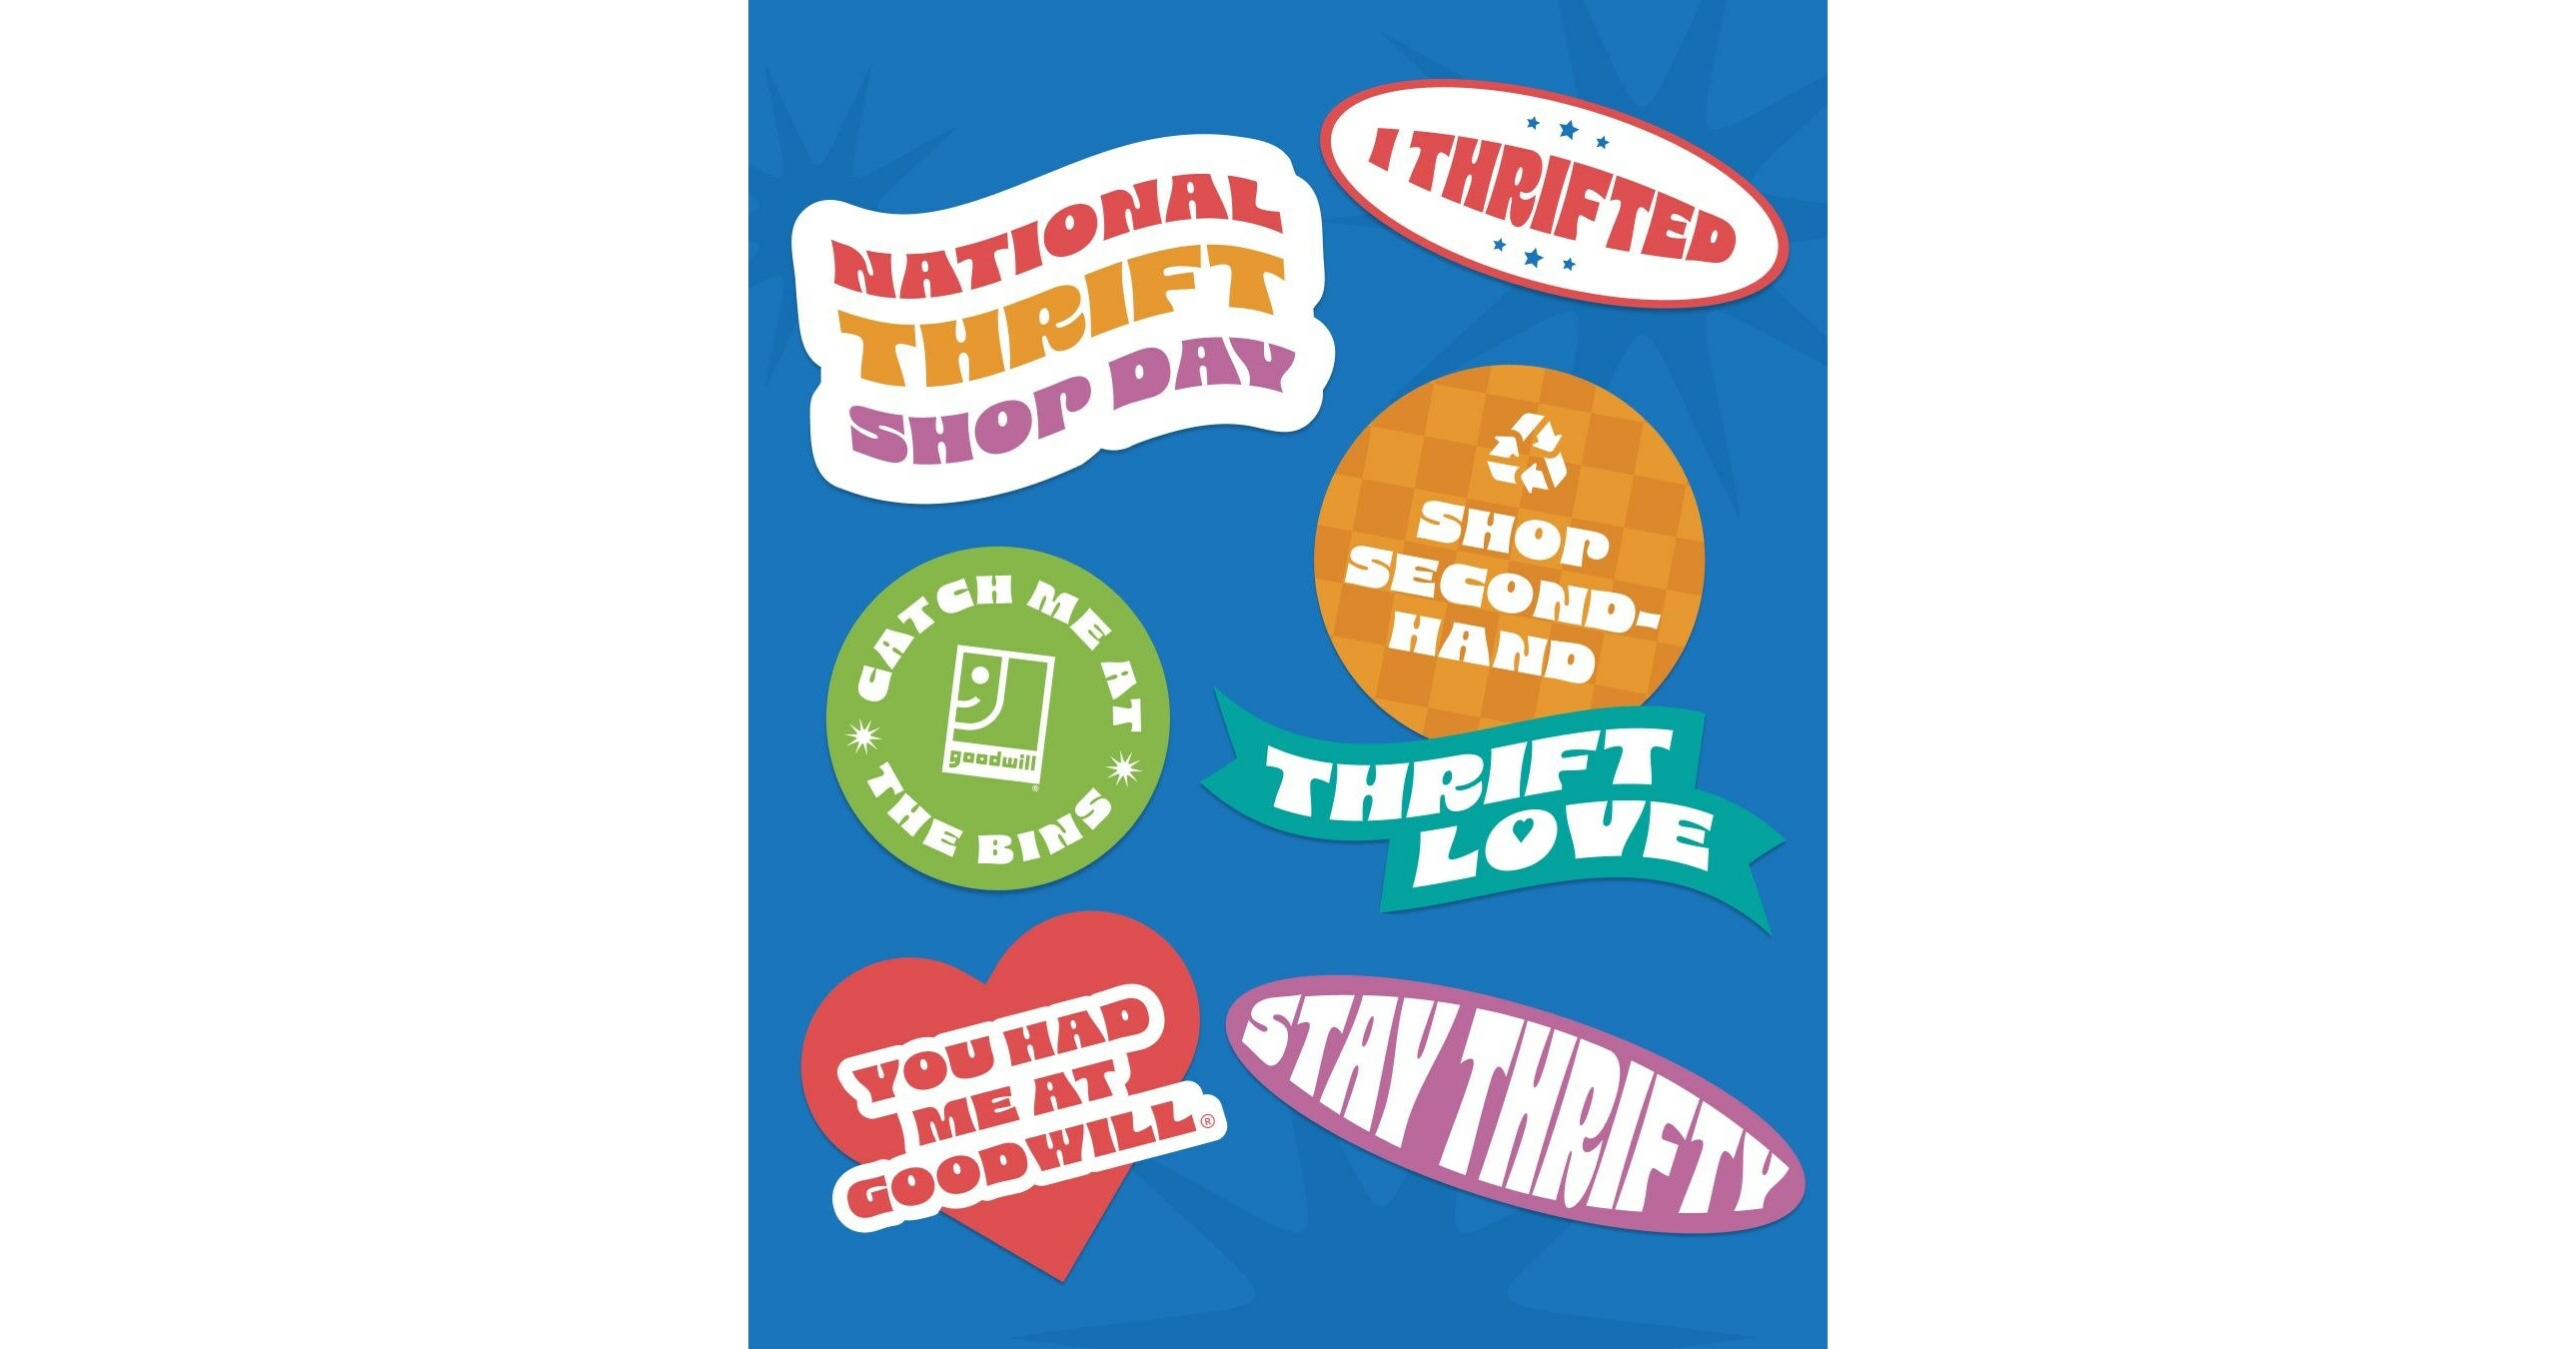 Make Goodwill® Your First Stop on National Thrift Shop Day